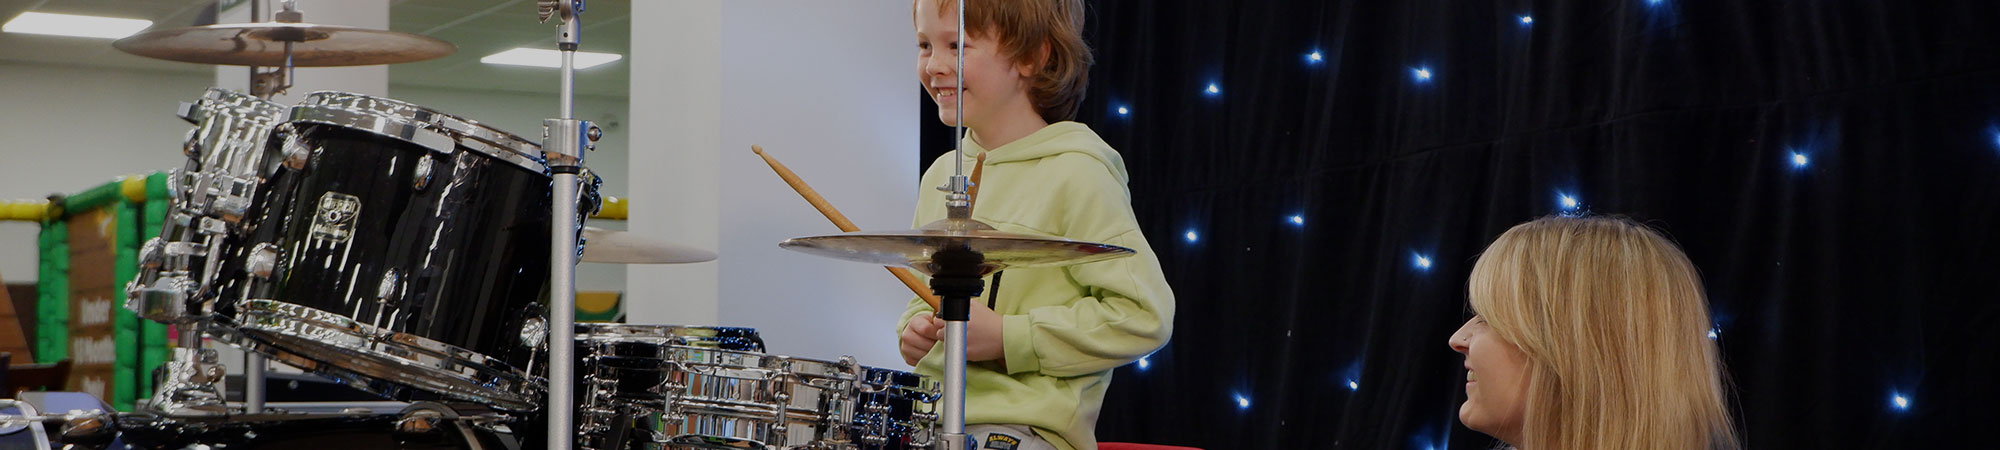 Young boy playing drums at Wrexham Sounds